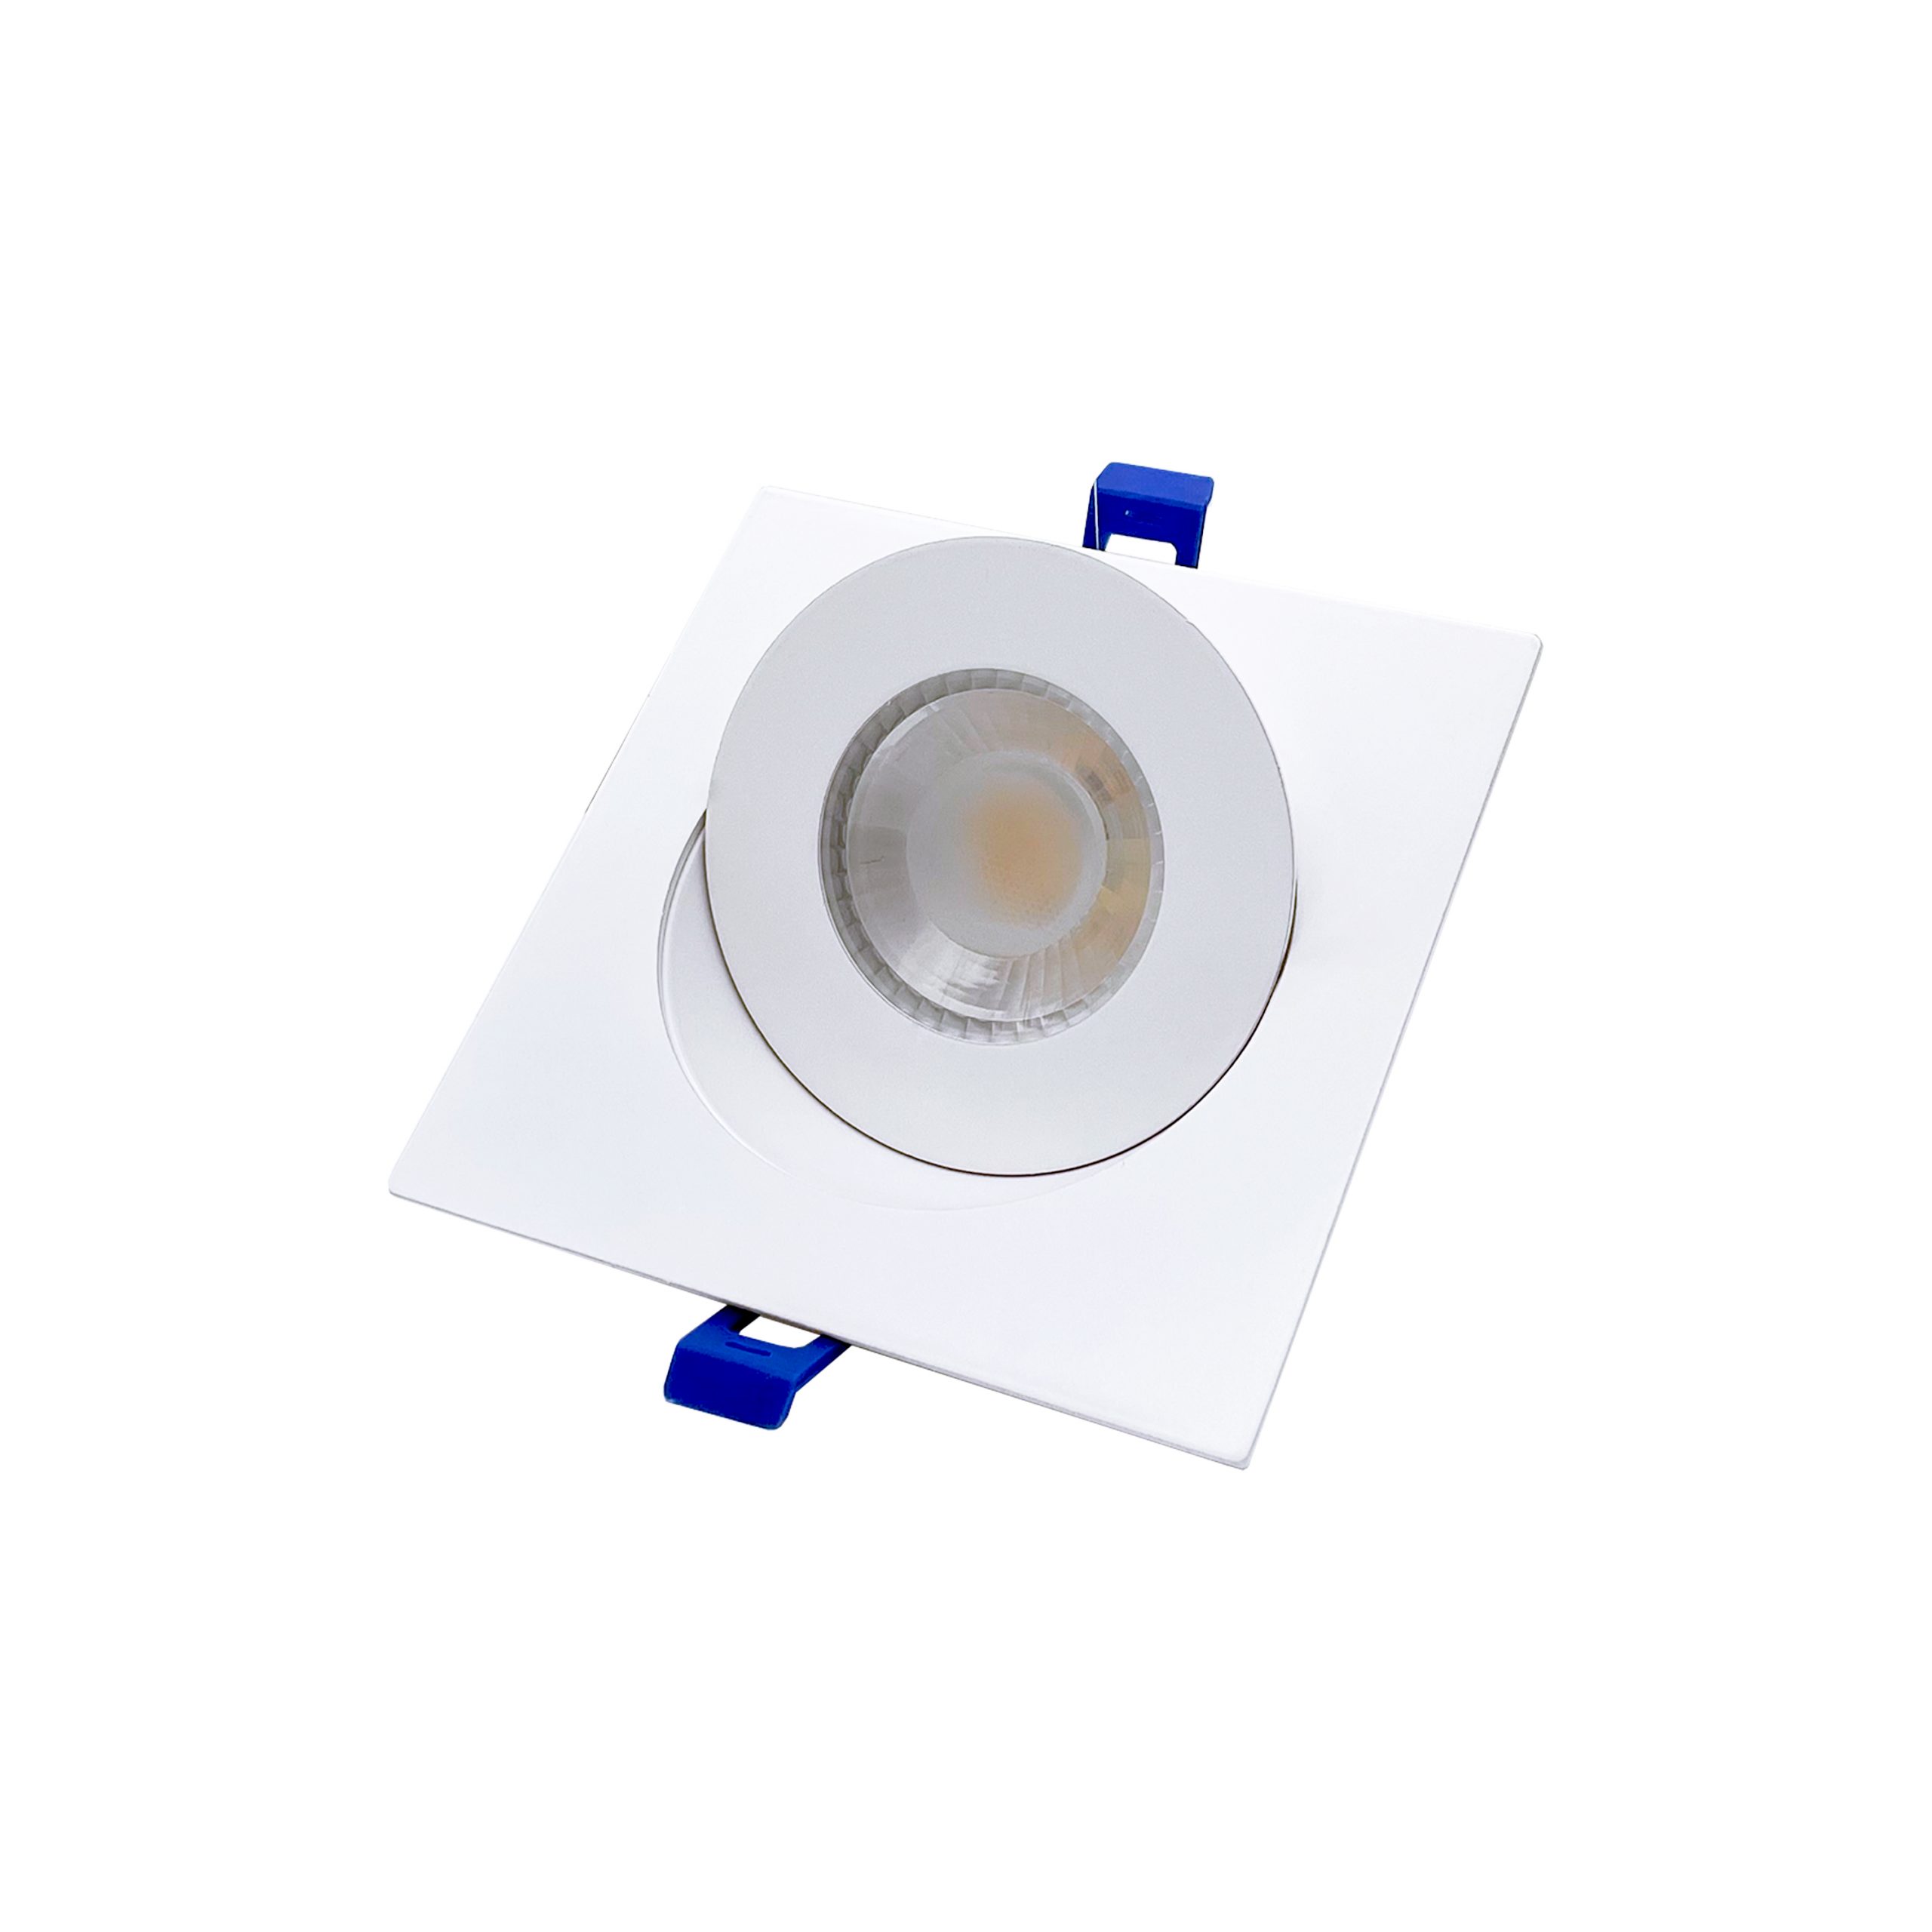 4″ 5CCT LED Recessed Lighting Gimbal Square